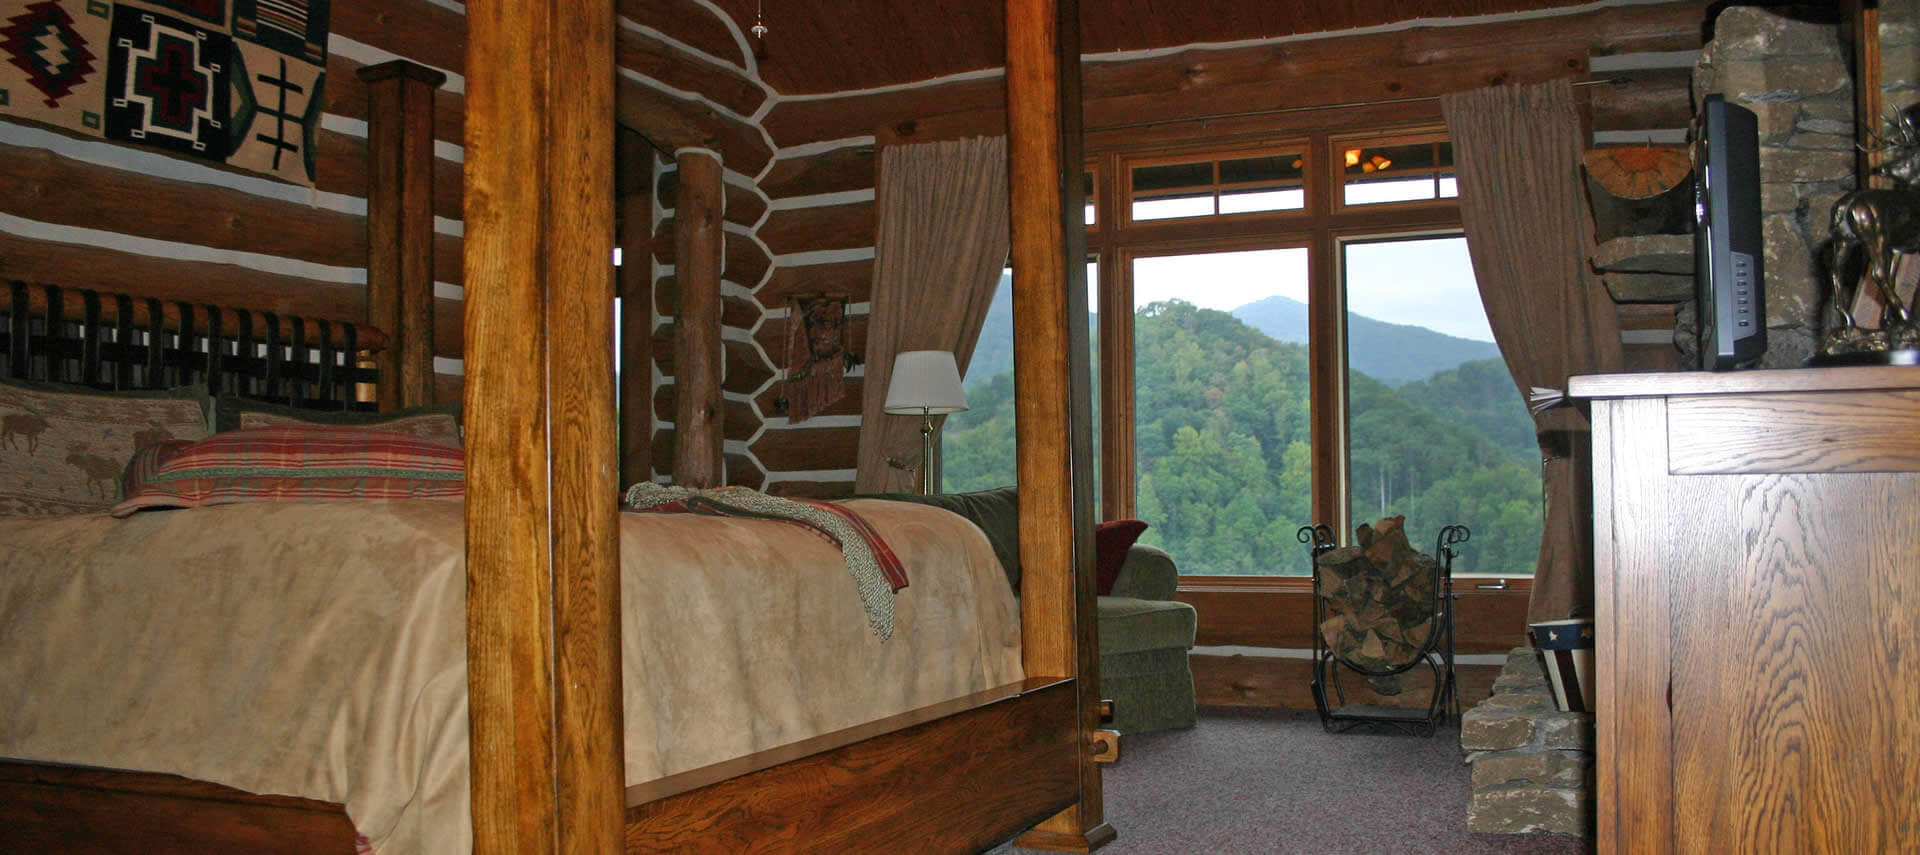 Large wooden poster bed in cozy bedroom with large windows overlooking tree-covered hills.